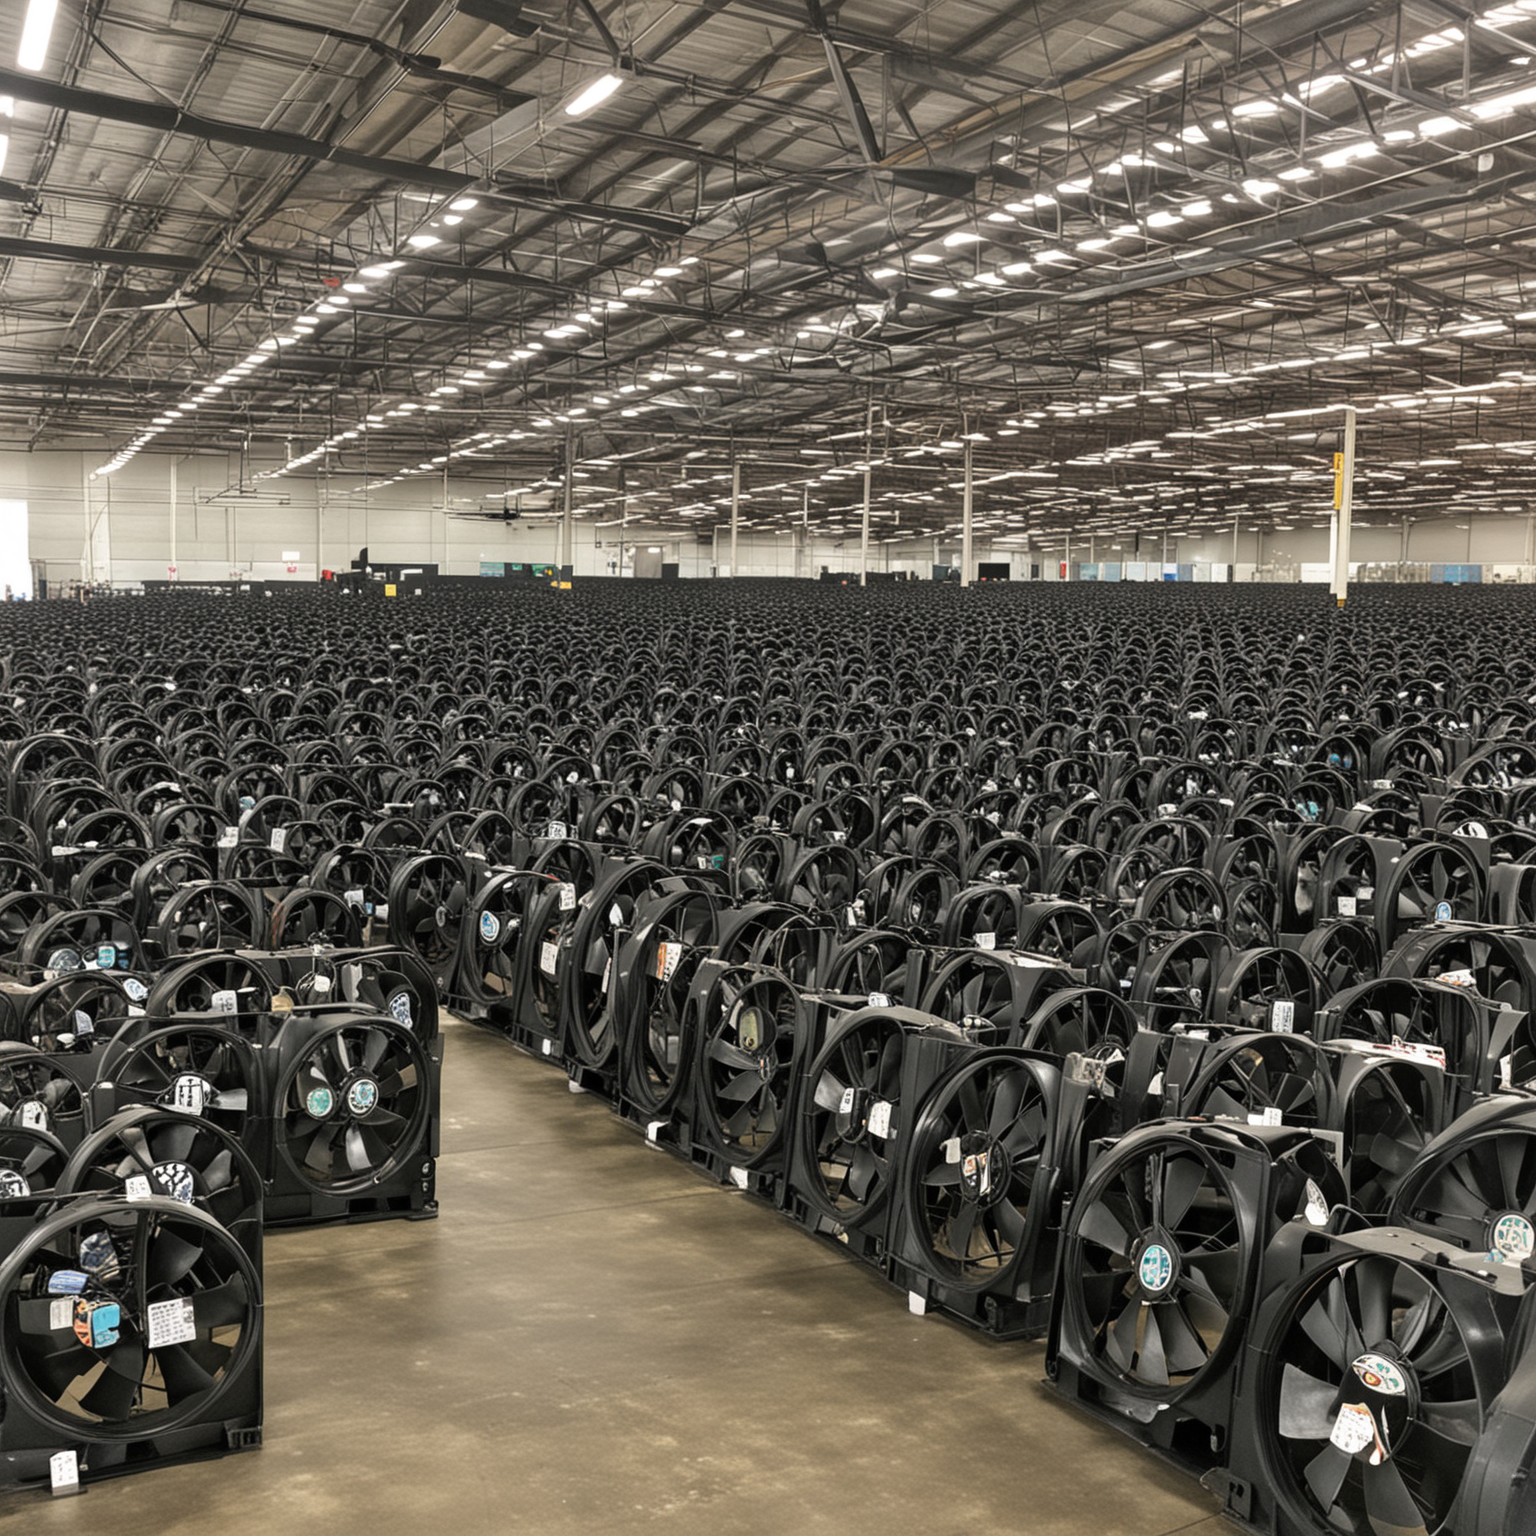 Tons of cooling fans